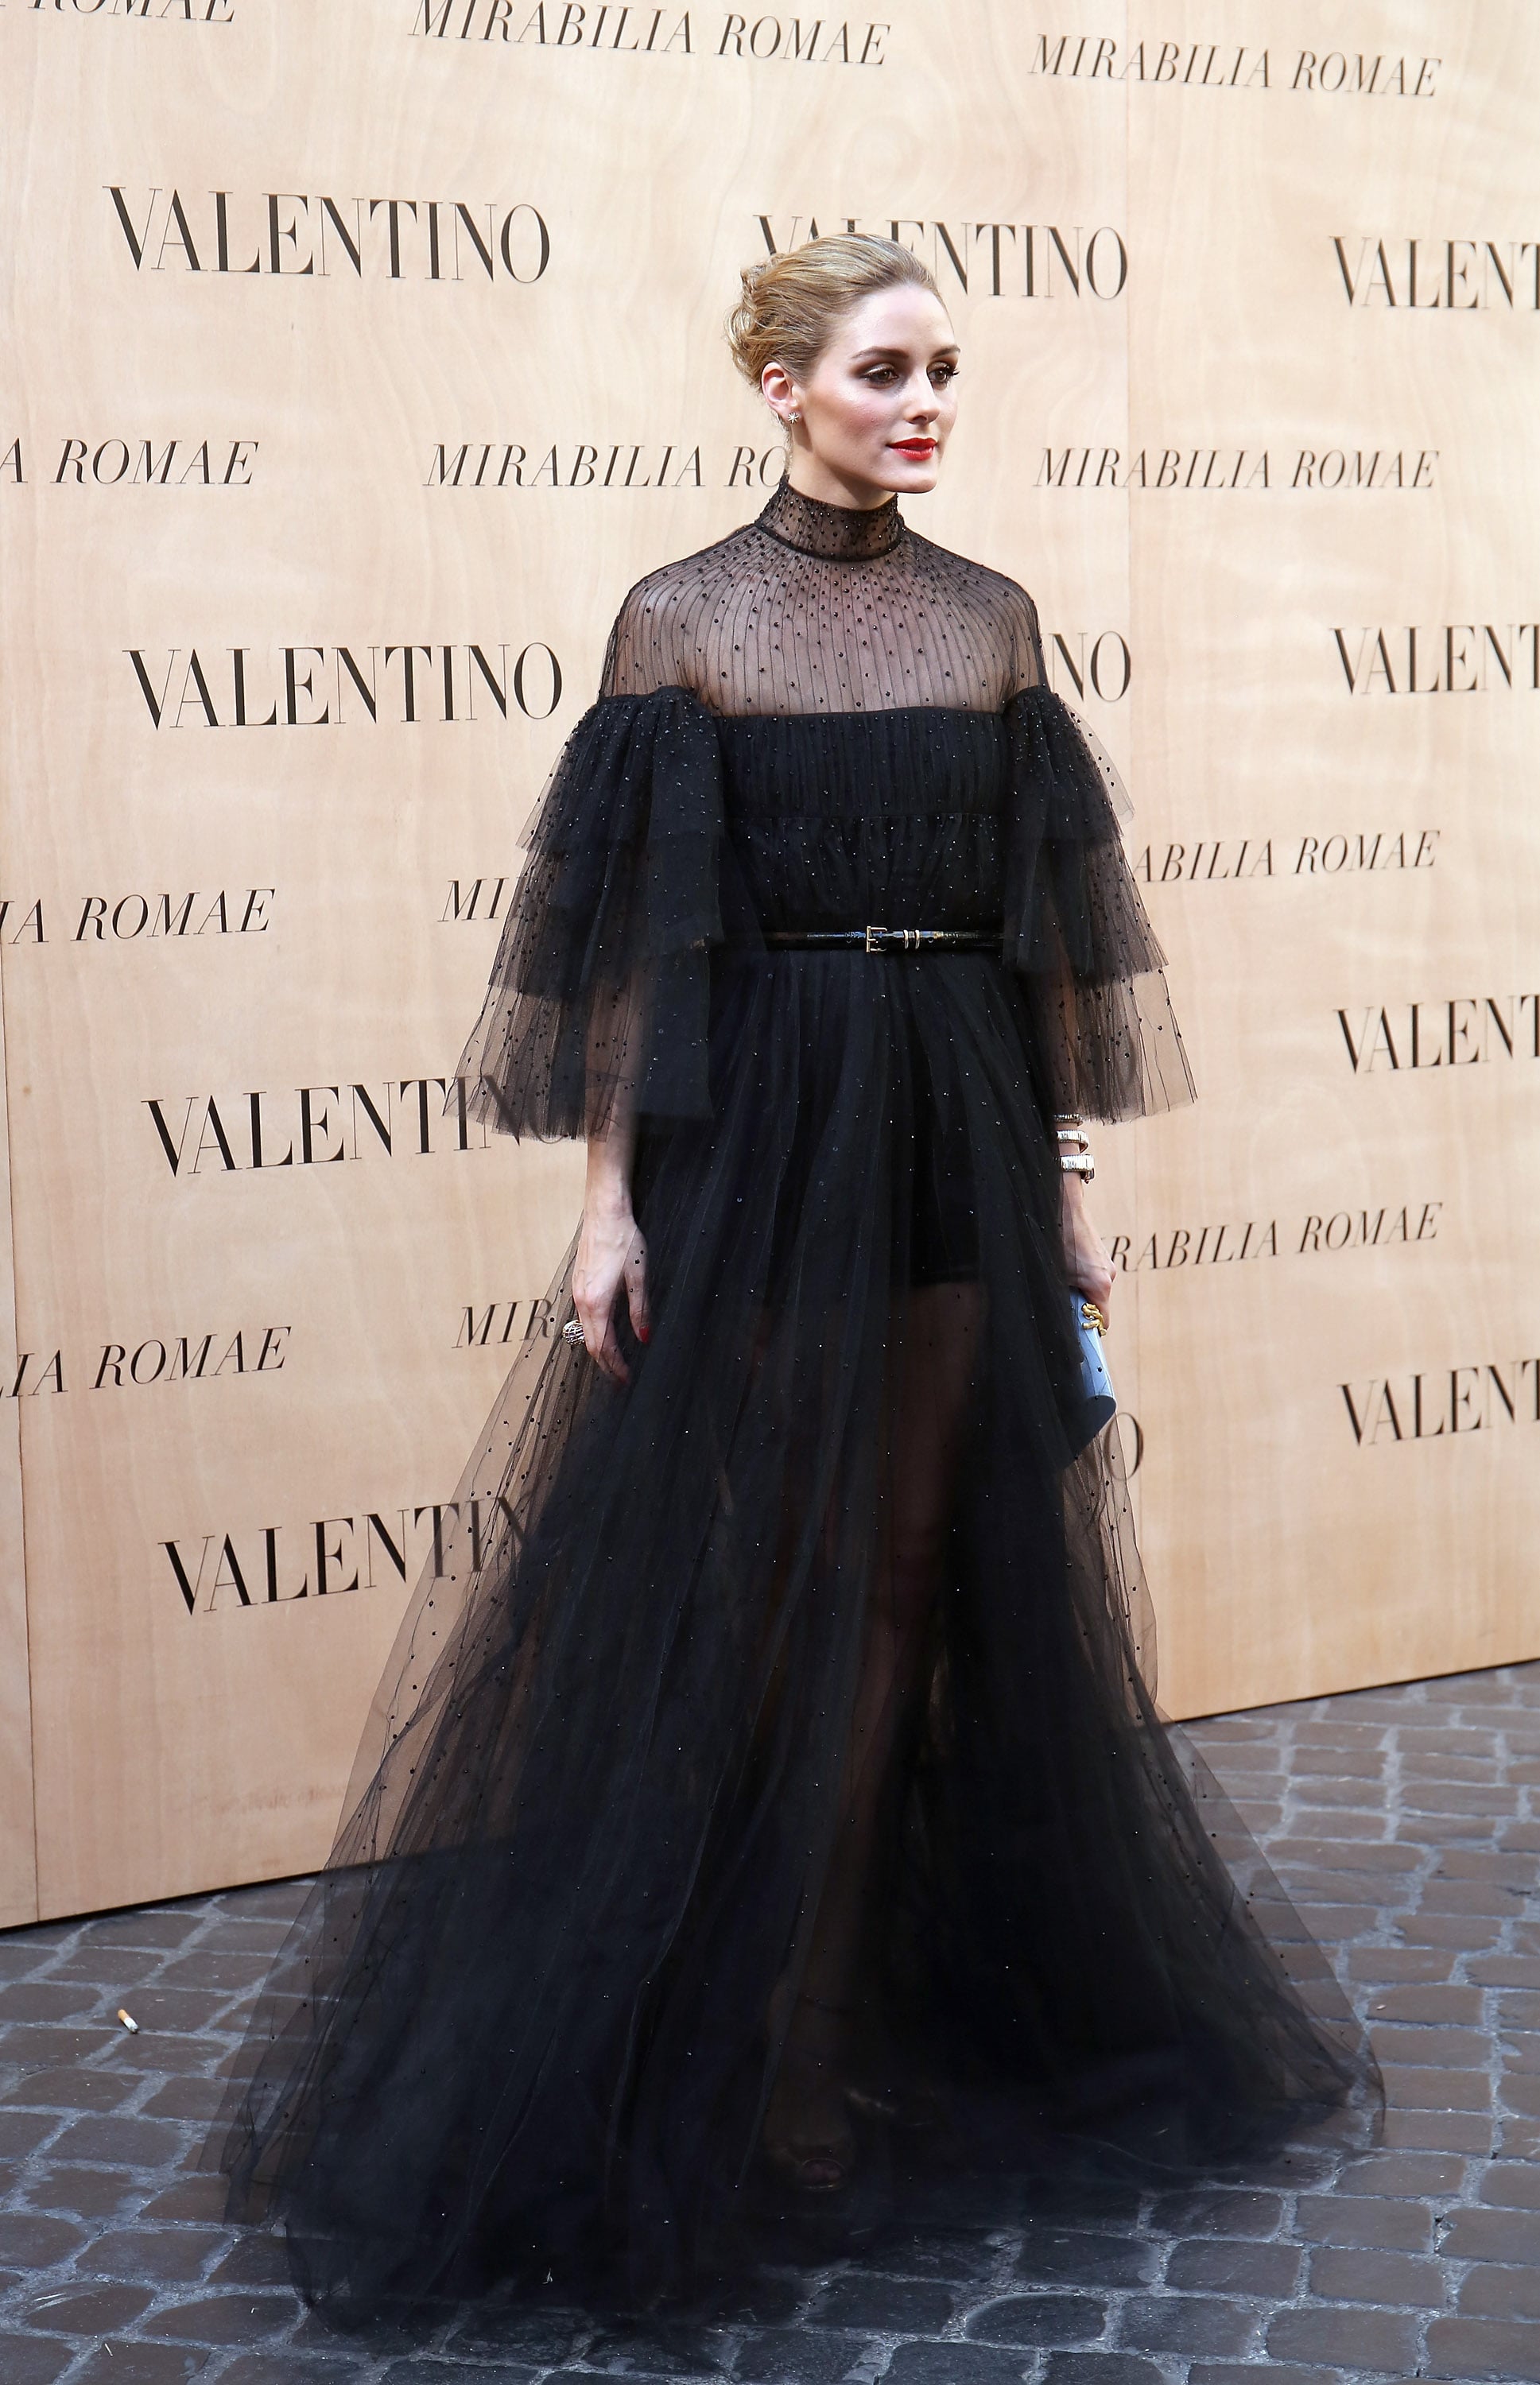 A dreamy gown for the Valentino Haute Couture show in Olivia Palermo's 65 Best Dresses | POPSUGAR Fashion Photo 14